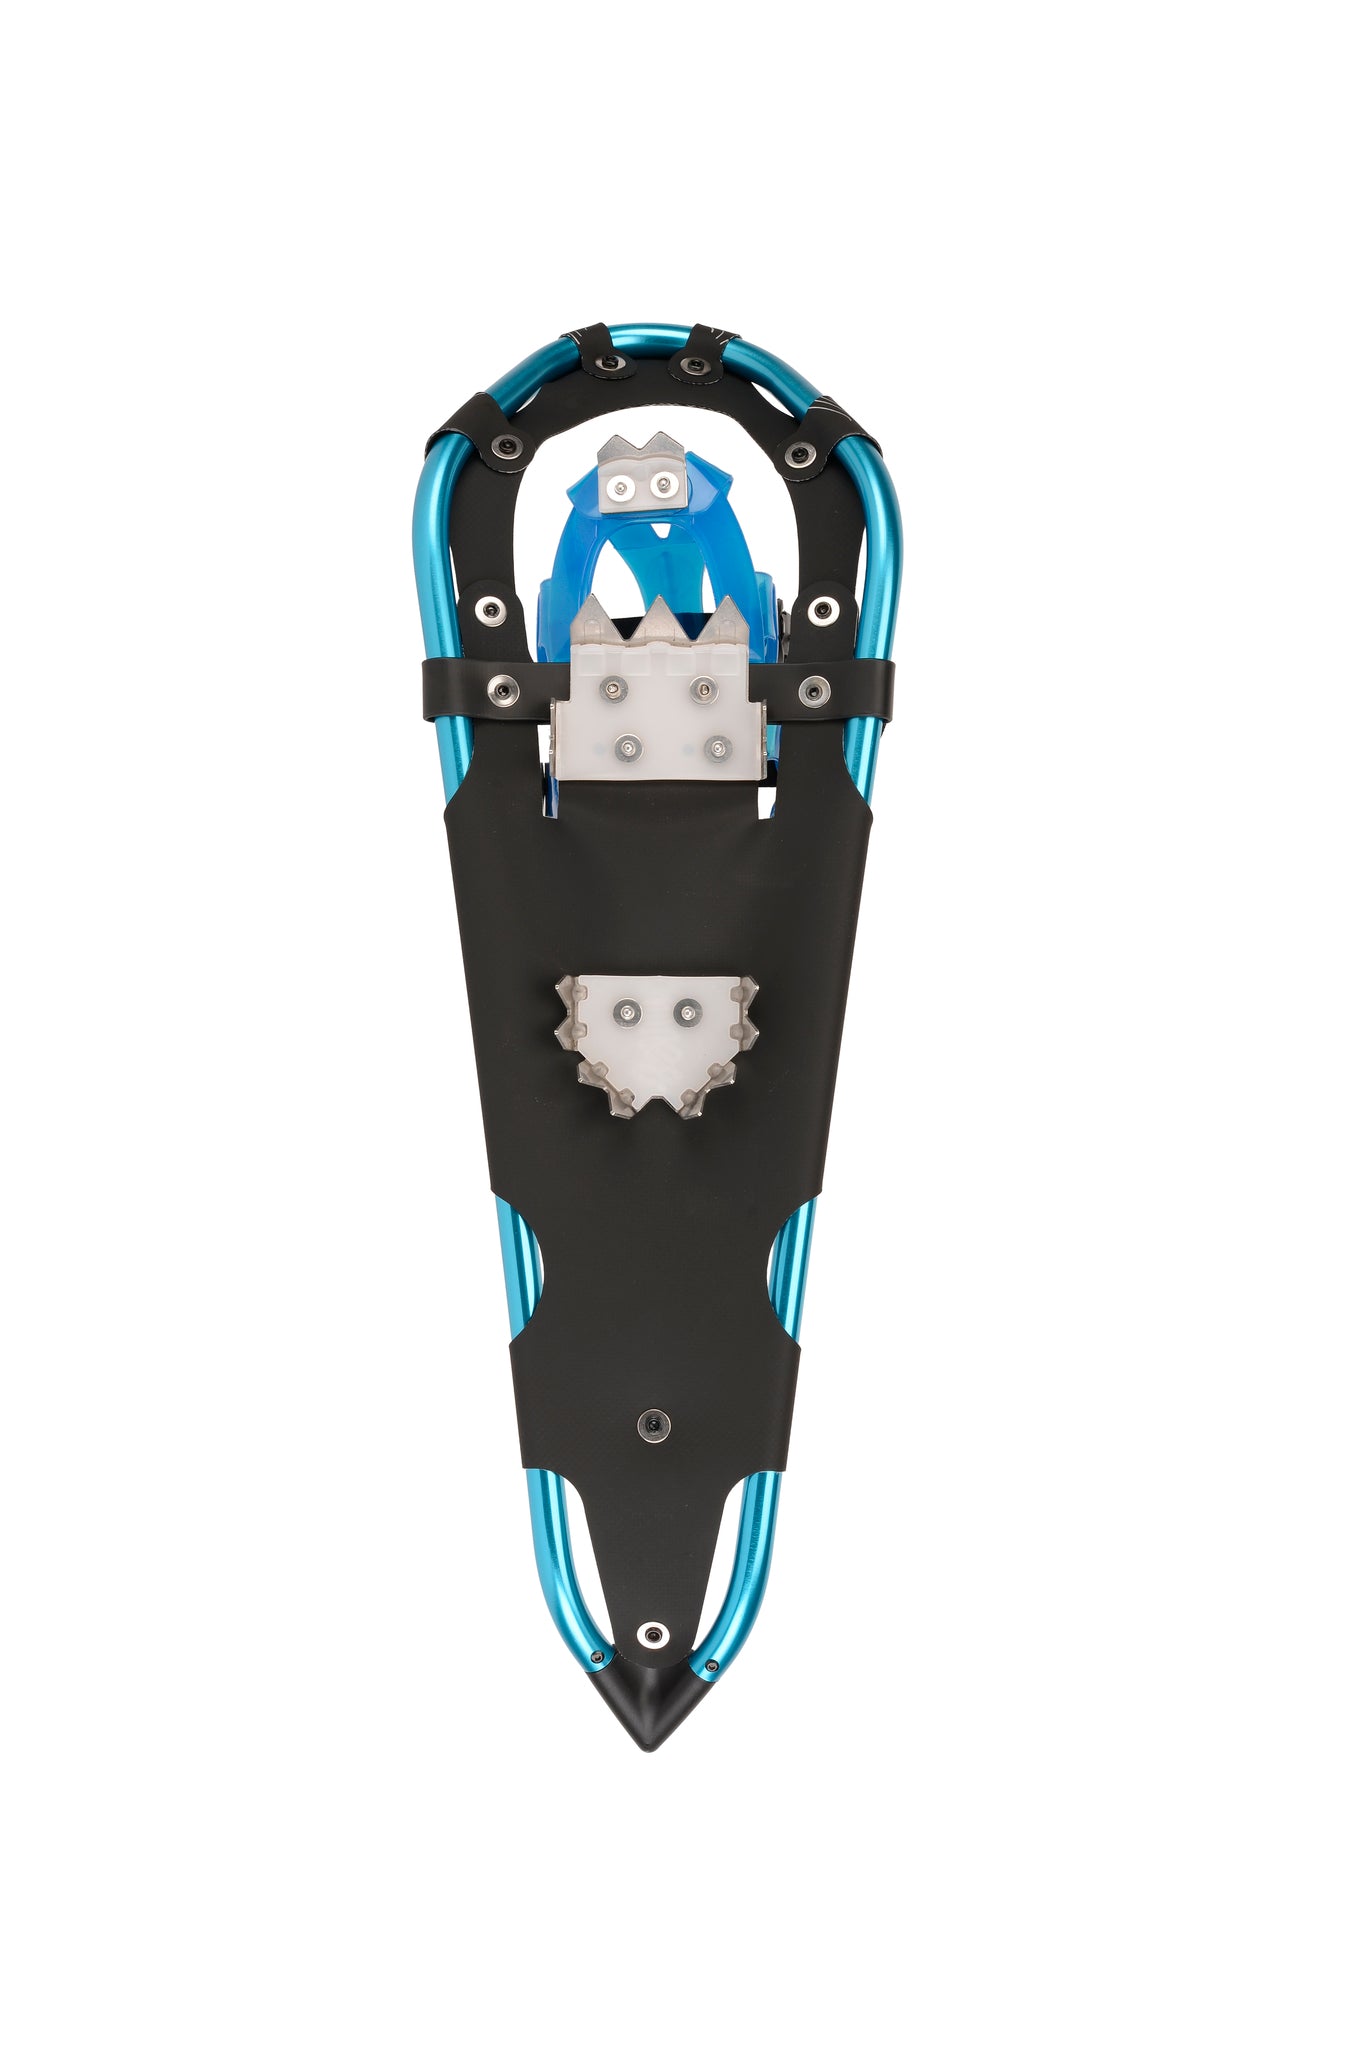 Crescent Moon Women's Gold 13 Teal Snowshoes - Winter 2021/2022